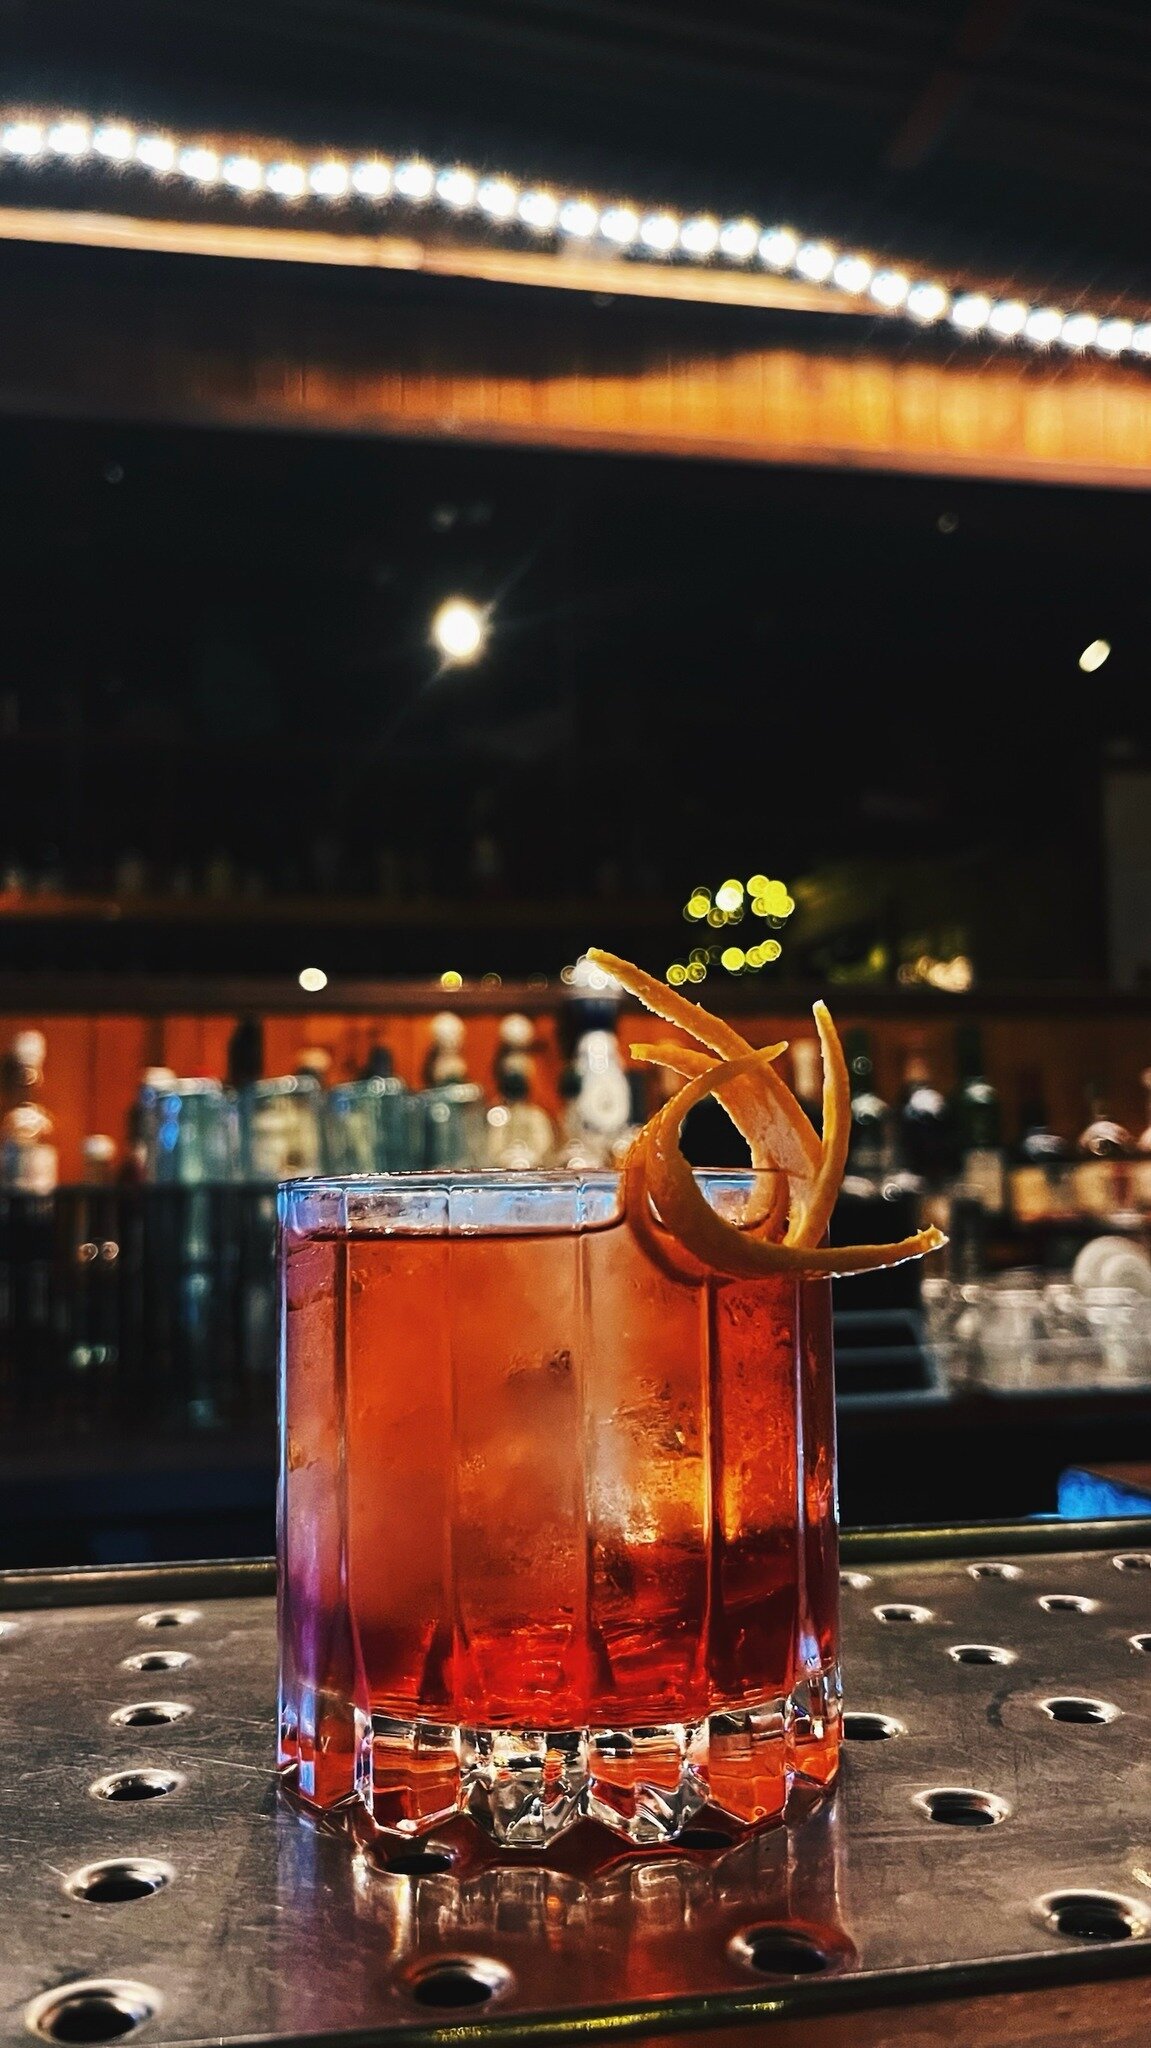 One of the classics. #negroni 

Paradise of the Mountain open for Apr&egrave;s from Midday till Late. 

#paradiseofthemountain #thredbo #snowymountainsnsw #tbarrestaurant #apres #apresski #apr&egrave;s #apresski #apr&egrave;s #tbarrestaurantthredbo #